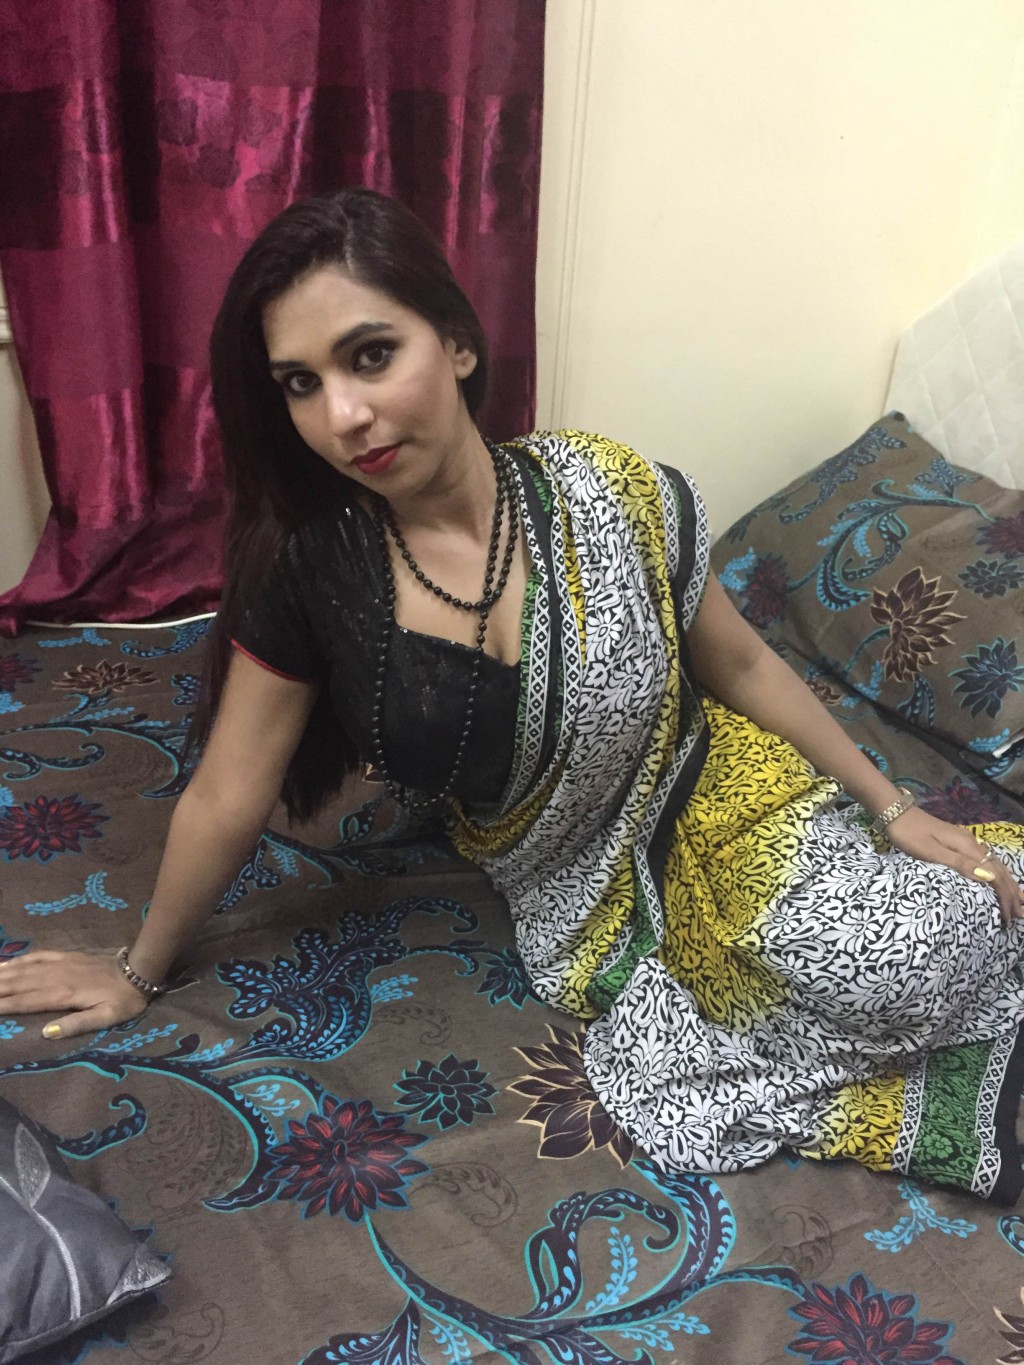 Escort Girl In India Other Hot Photos